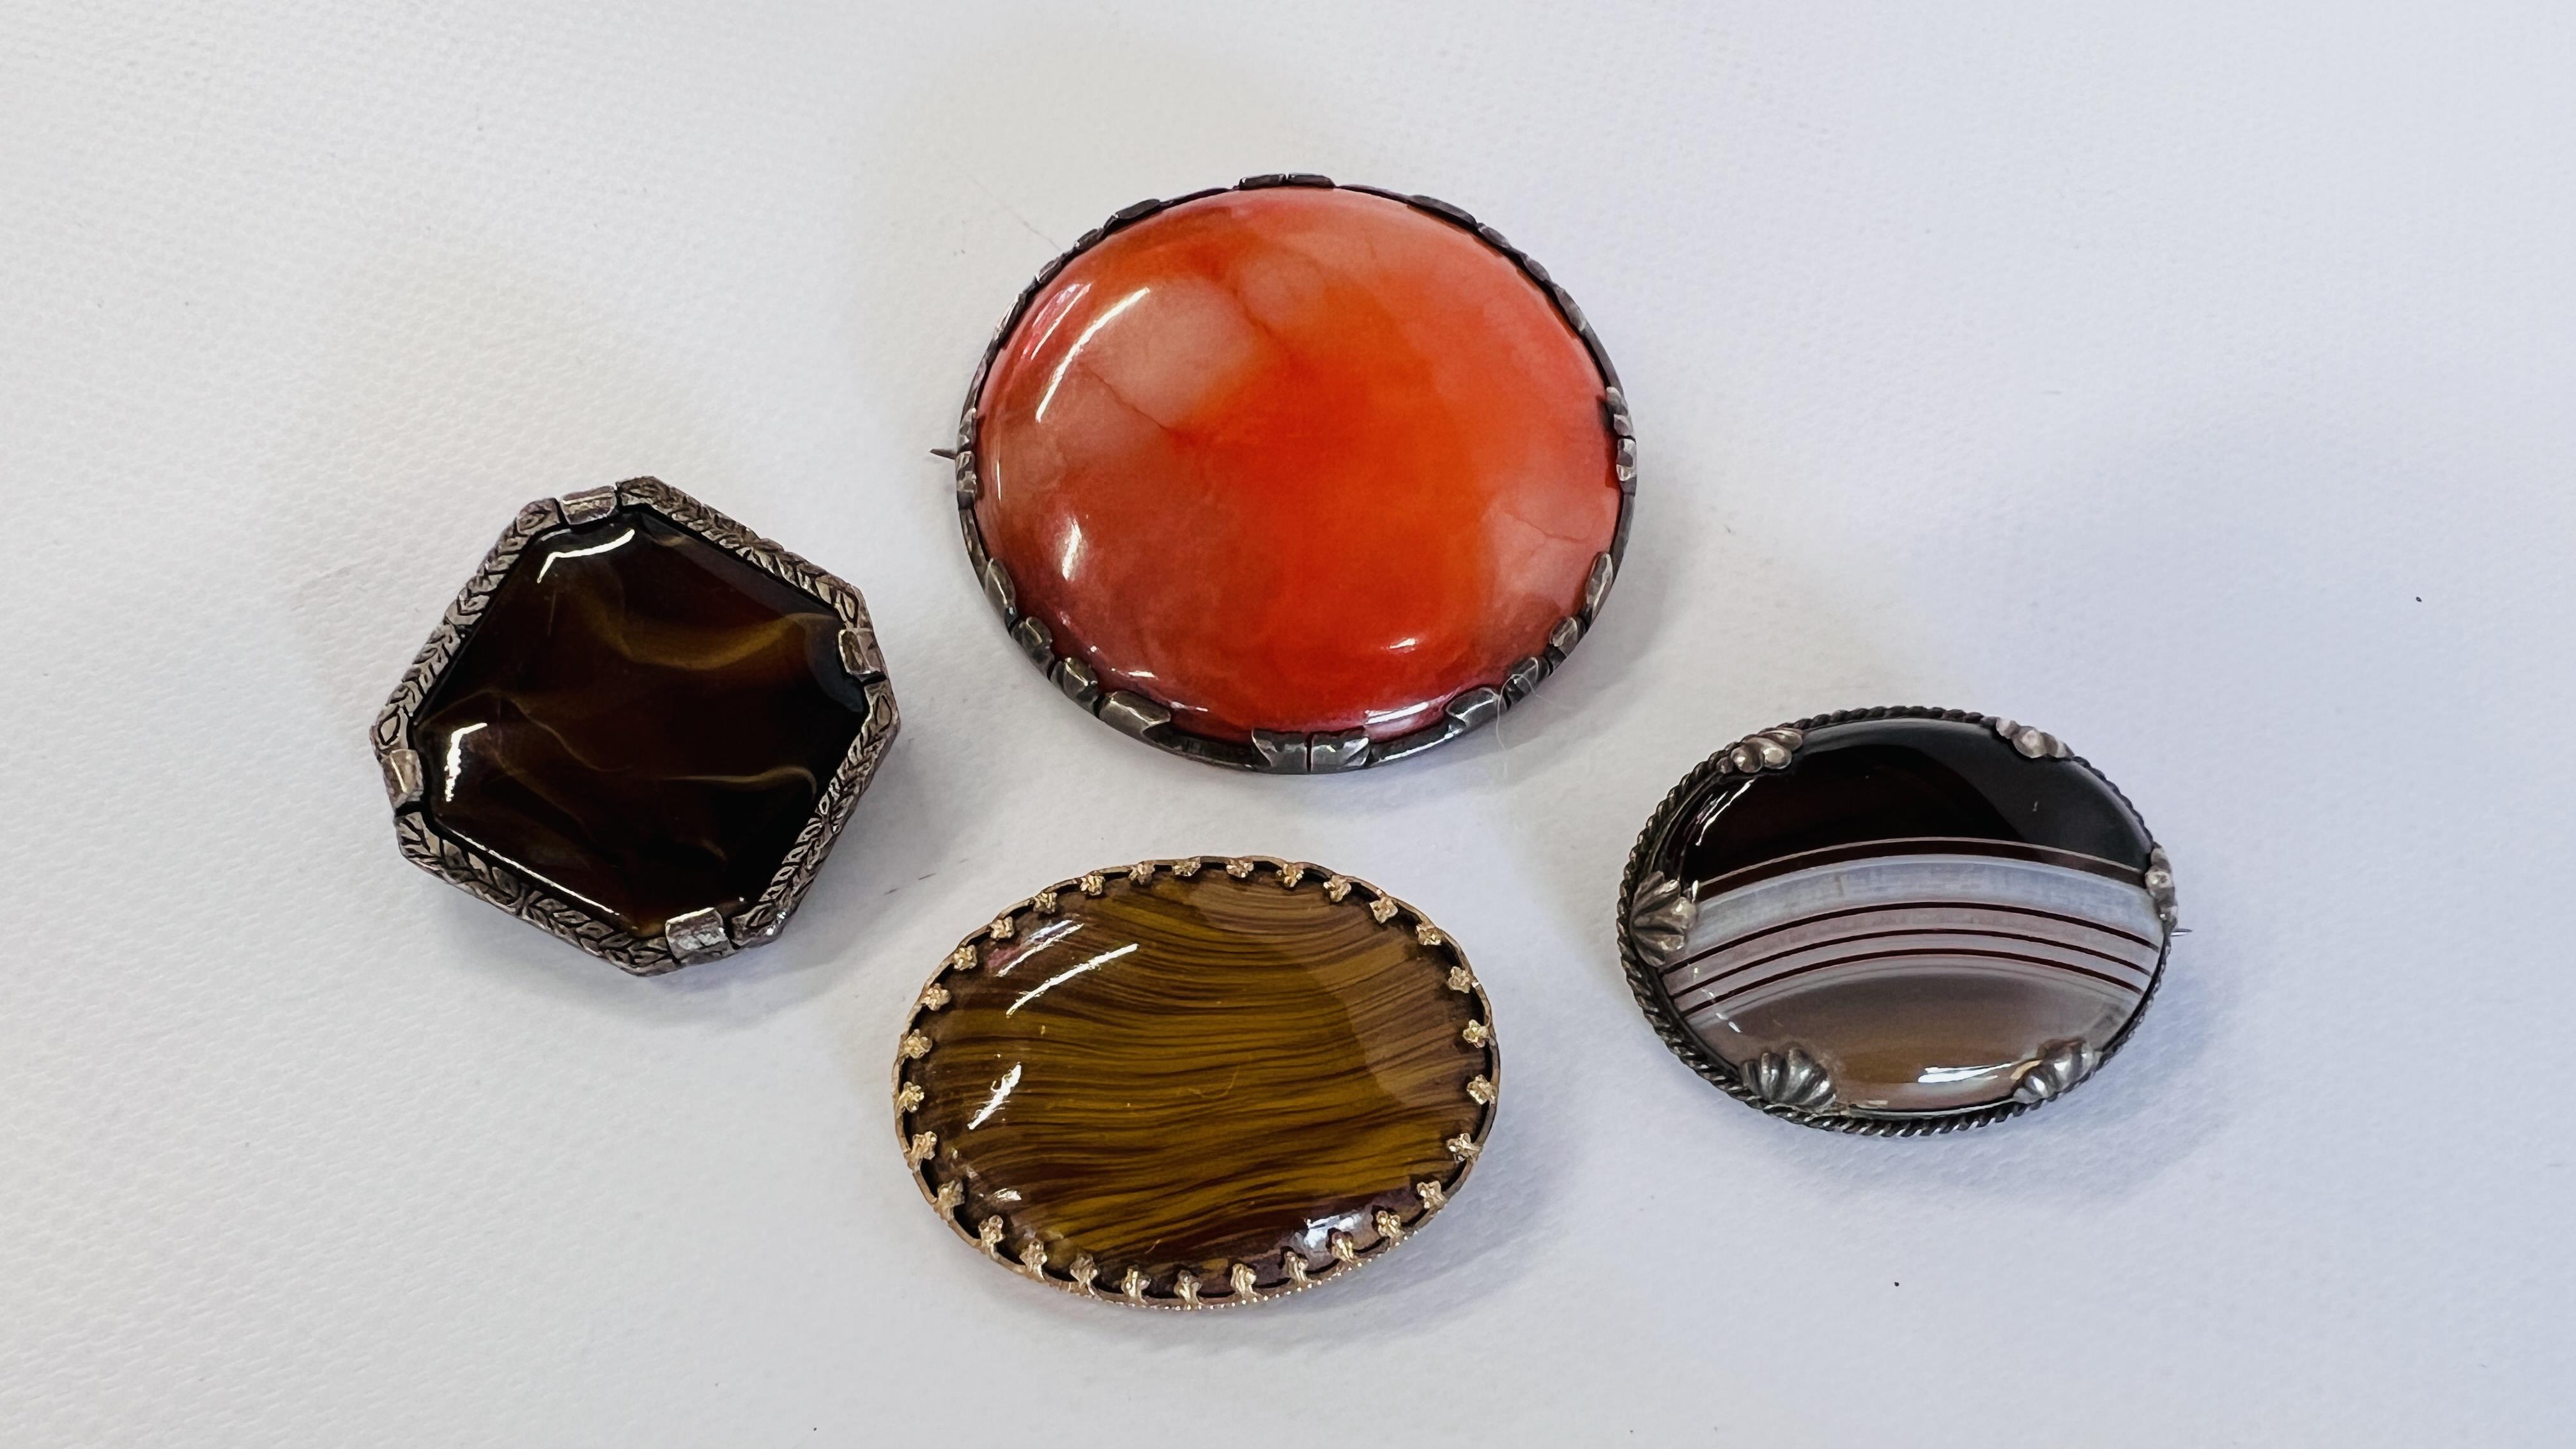 FOUR ANTIQUE AND VINTAGE AGATE GLASS BROOCHES